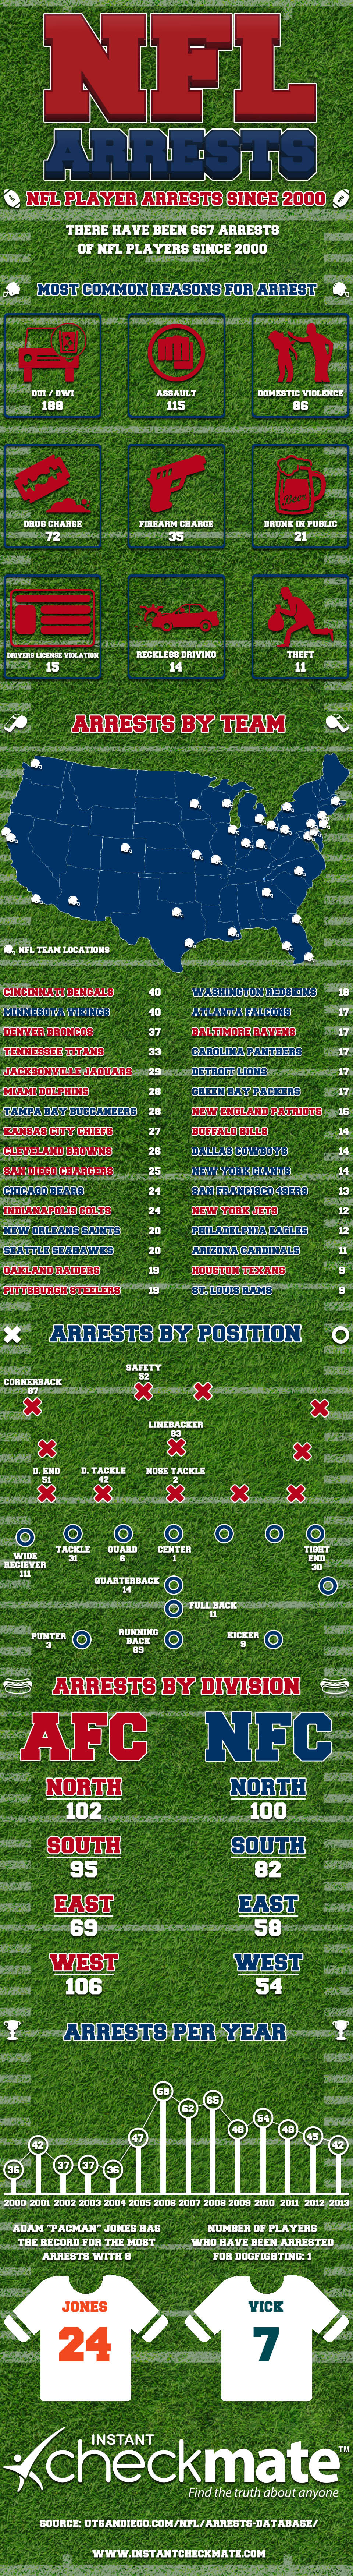 infographic-nfl-player-arrests-since-2000